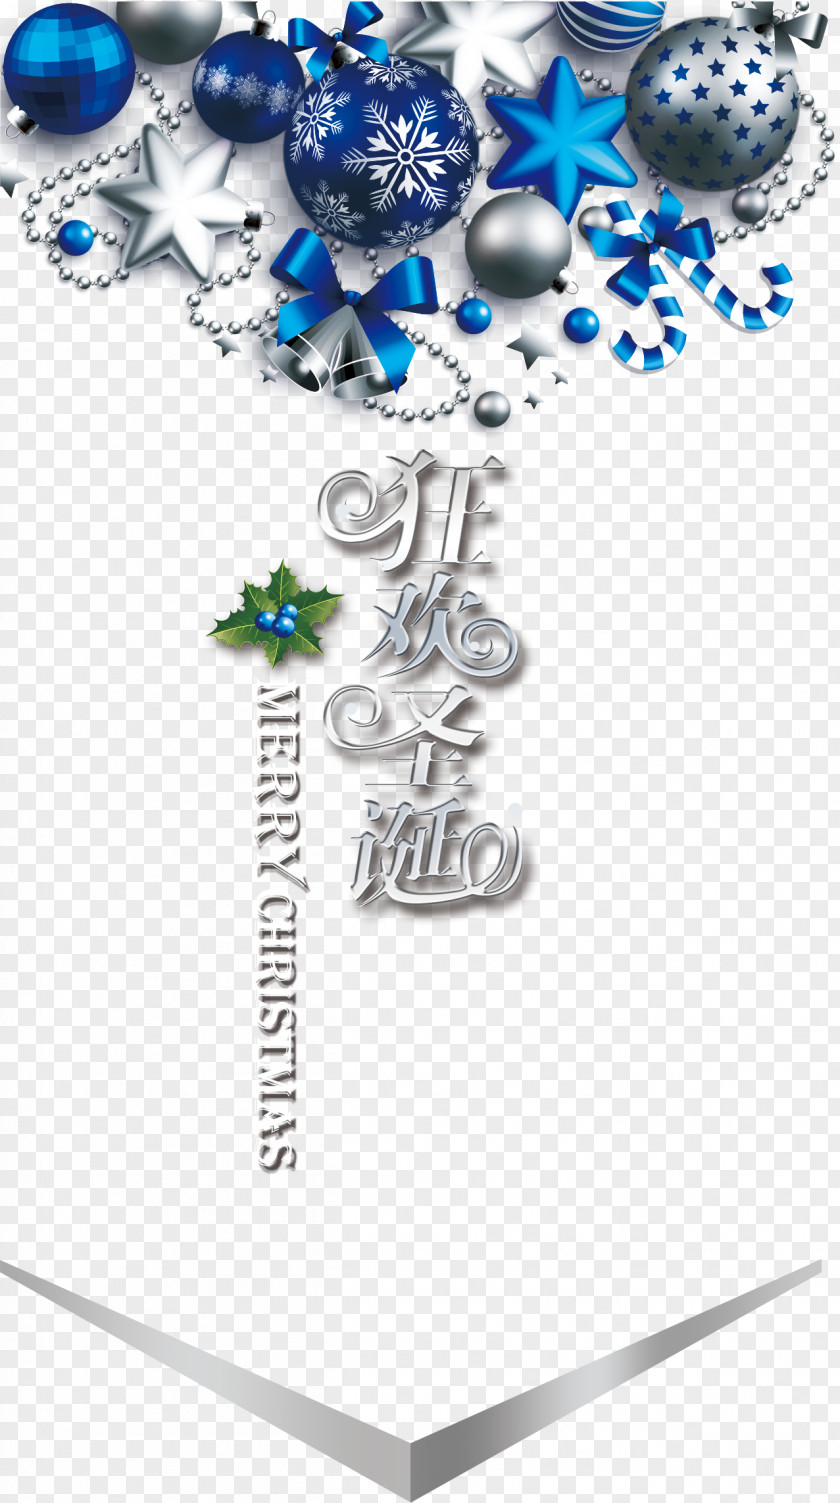 Happy Christmas Elements Poster PNG